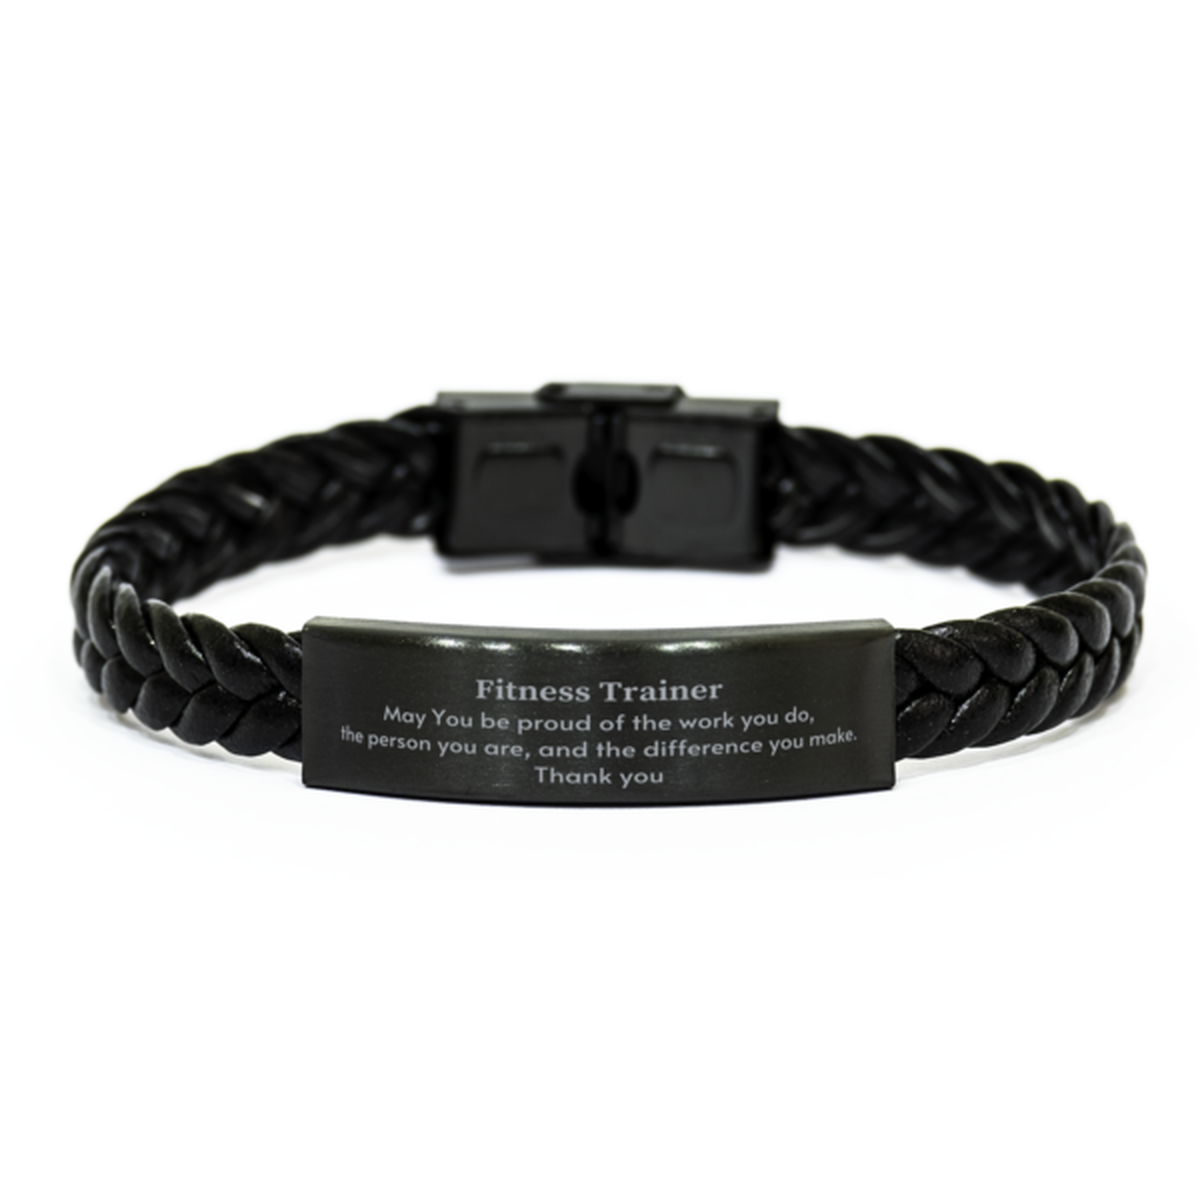 Heartwarming Braided Leather Bracelet Retirement Coworkers Gifts for Fitness Trainer, Fitness Trainer May You be proud of the work you do, the person you are Gifts for Boss Men Women Friends